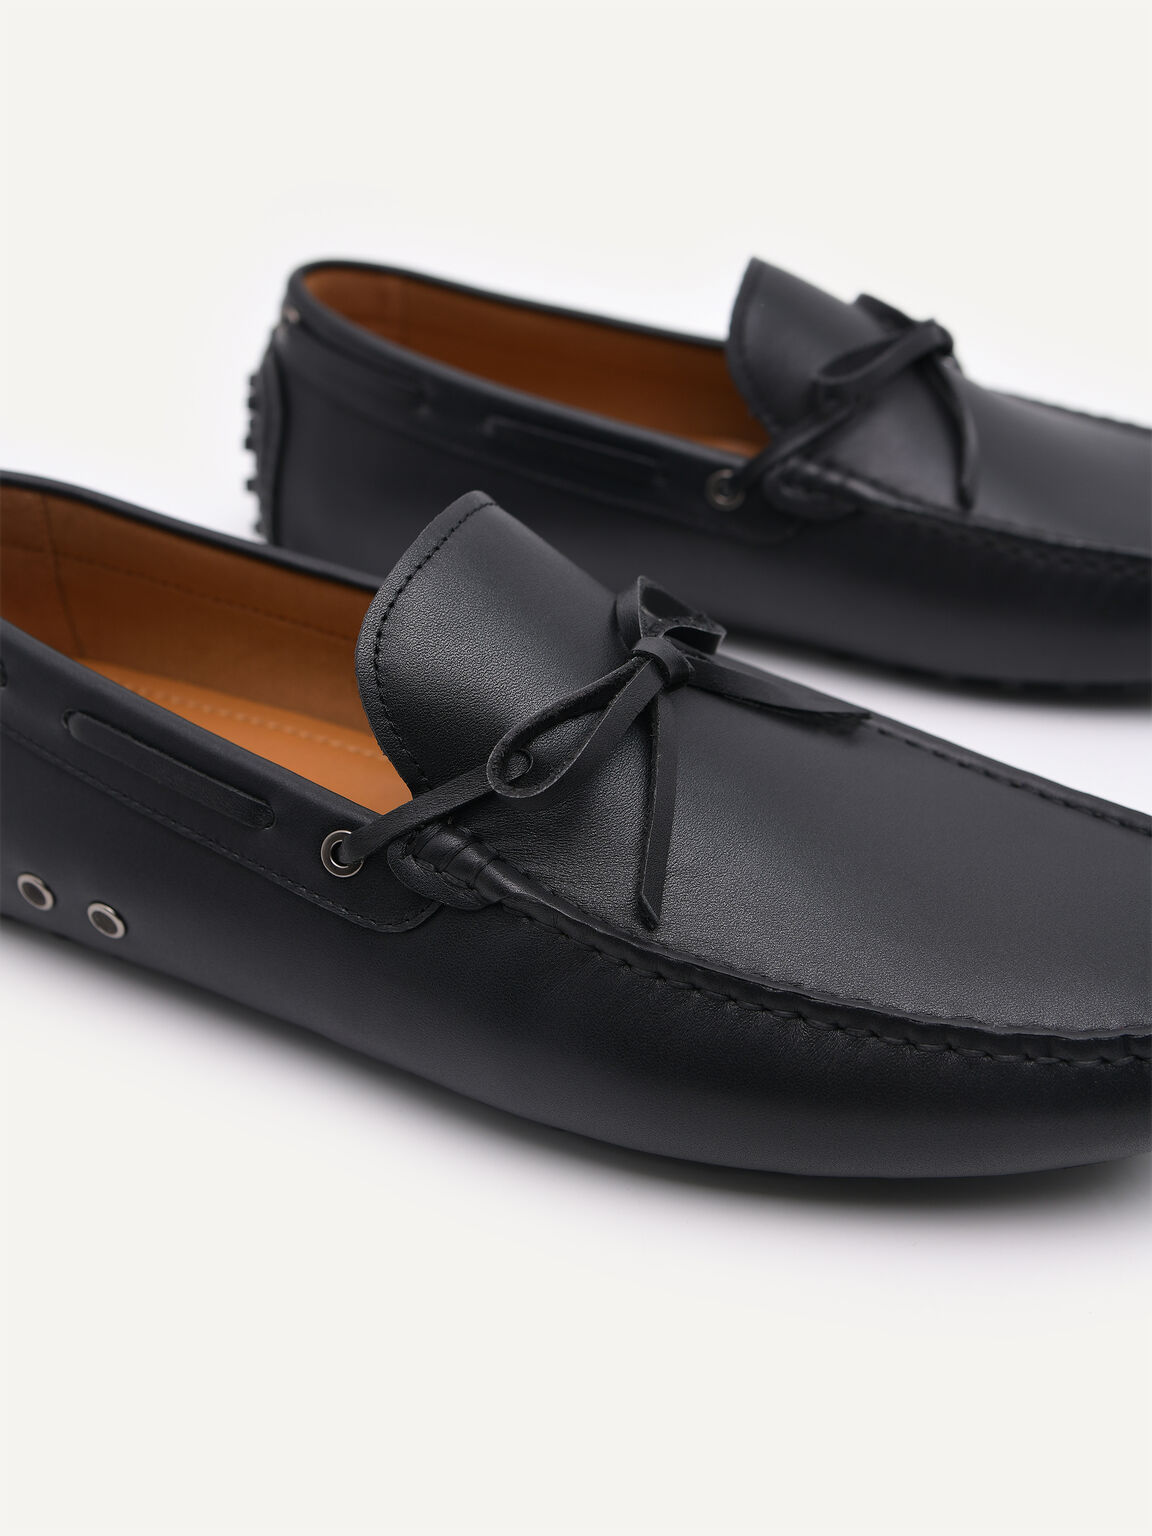 Leather Moccasins with Bow Detail, Black